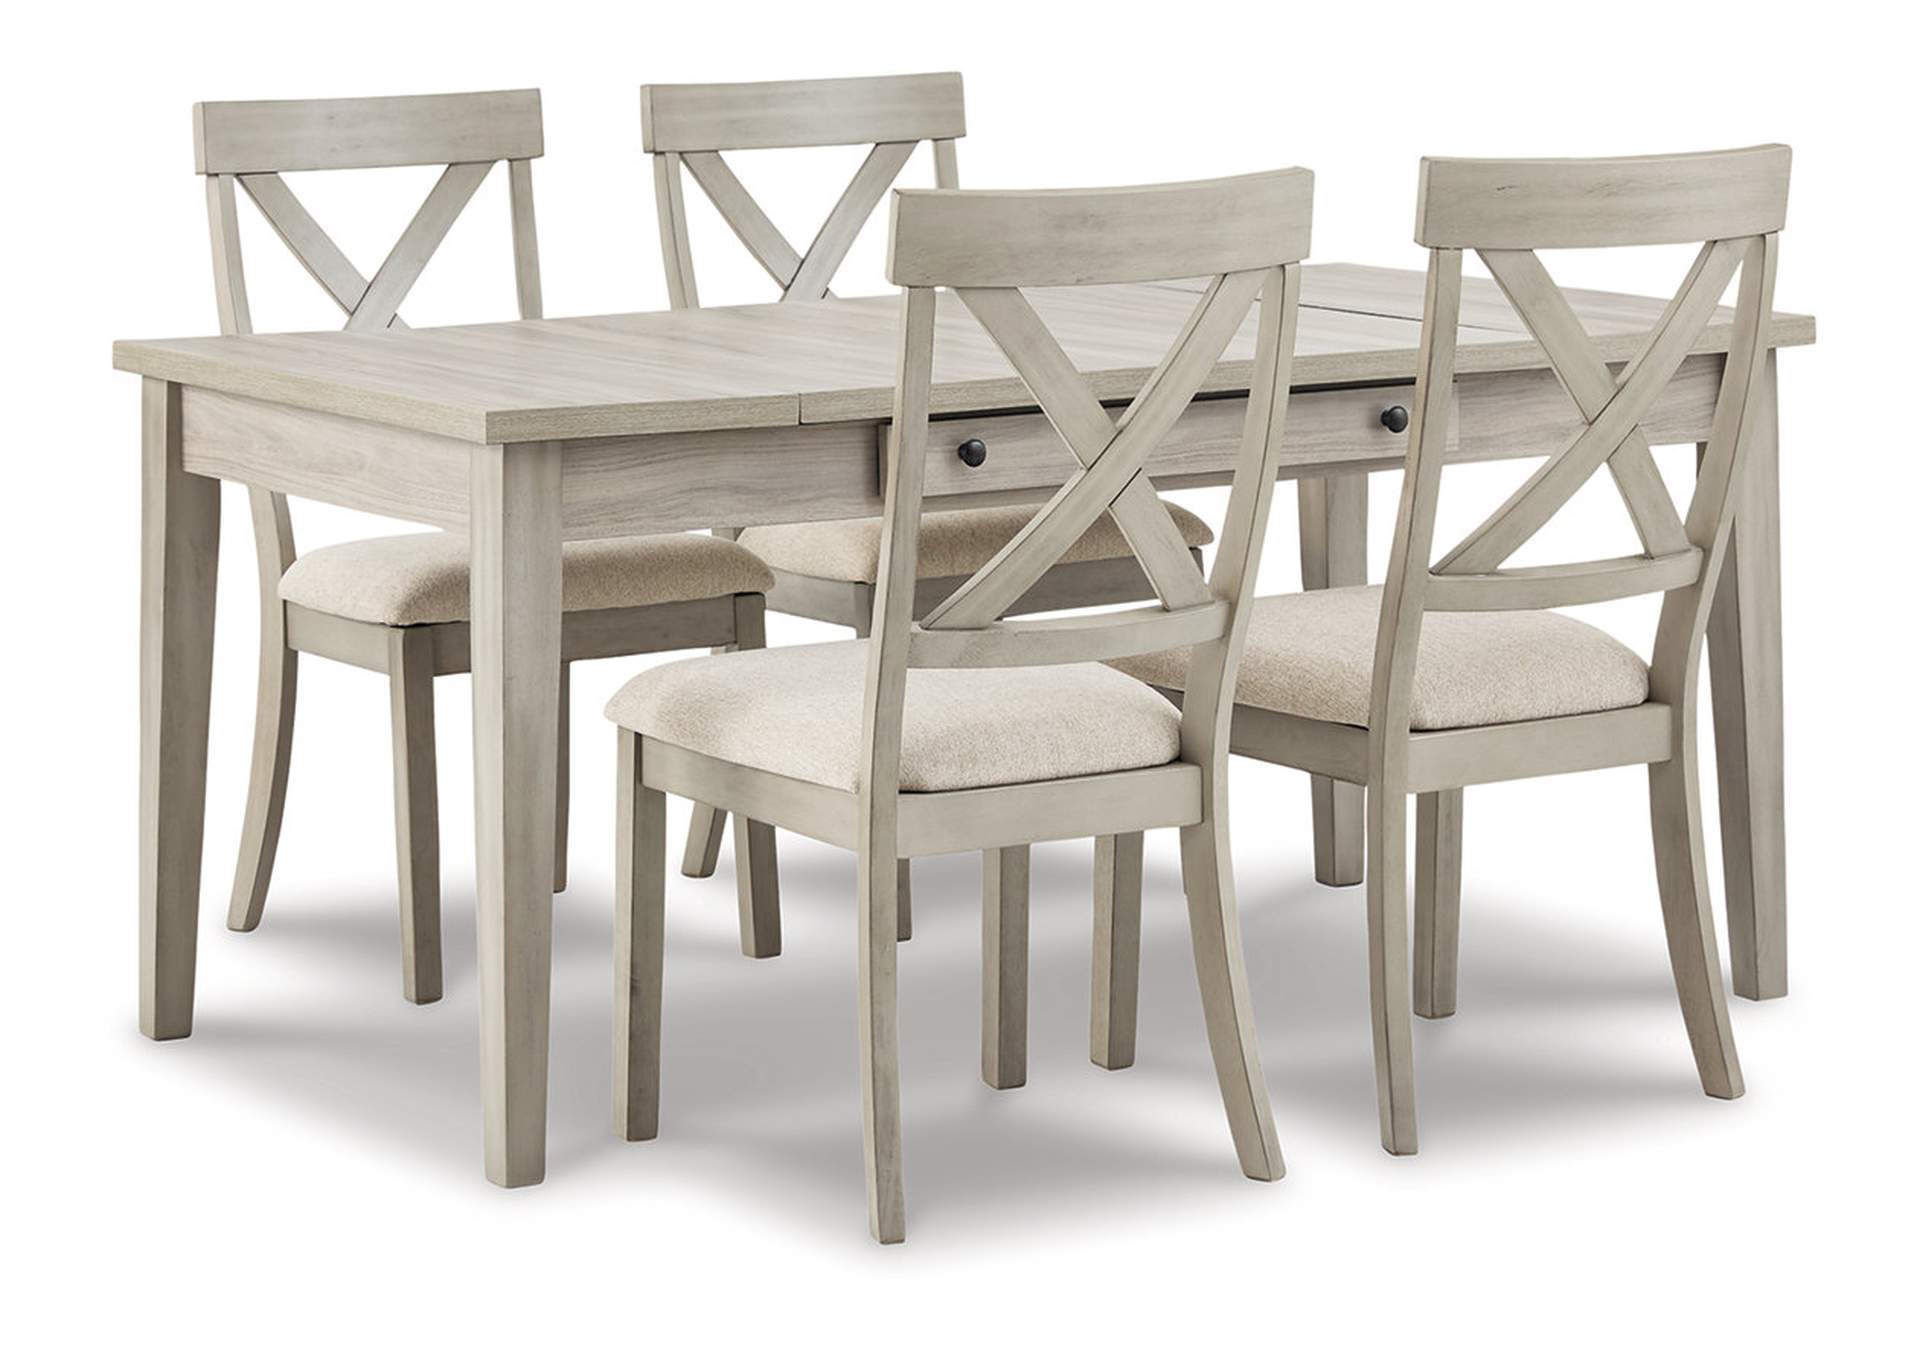 Parellen Dining Table and 4 Chairs,Signature Design By Ashley